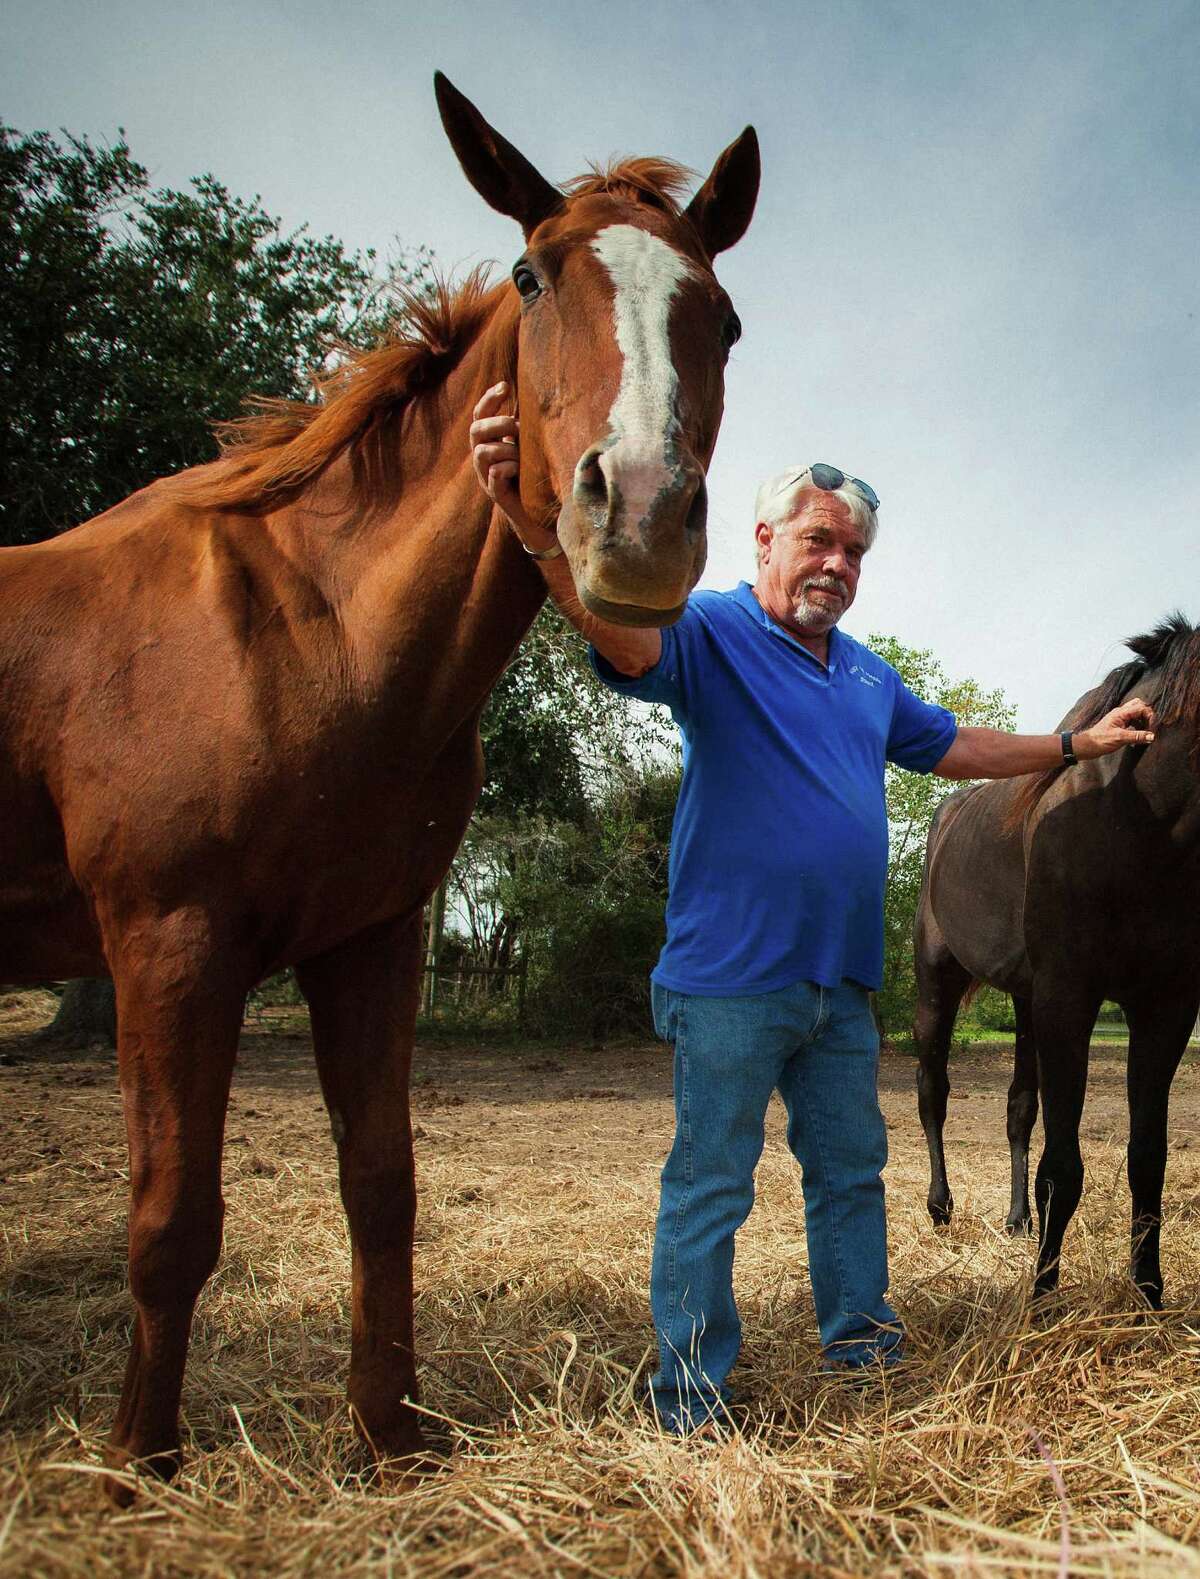 Jerry Finch, President and Founder of Habitat for Horses, examines several horses at the Habitat for Horses ranch, Monday, Oct. 15, 2012, in Hitchcock. Habitat for Horses rescues equines from starvation, neglect and abuse while providing equine rescue services to law enforcement, education services to horse owners and opportunities for the public to foster and adopt horses. ( Michael Paulsen / Houston Chronicle )